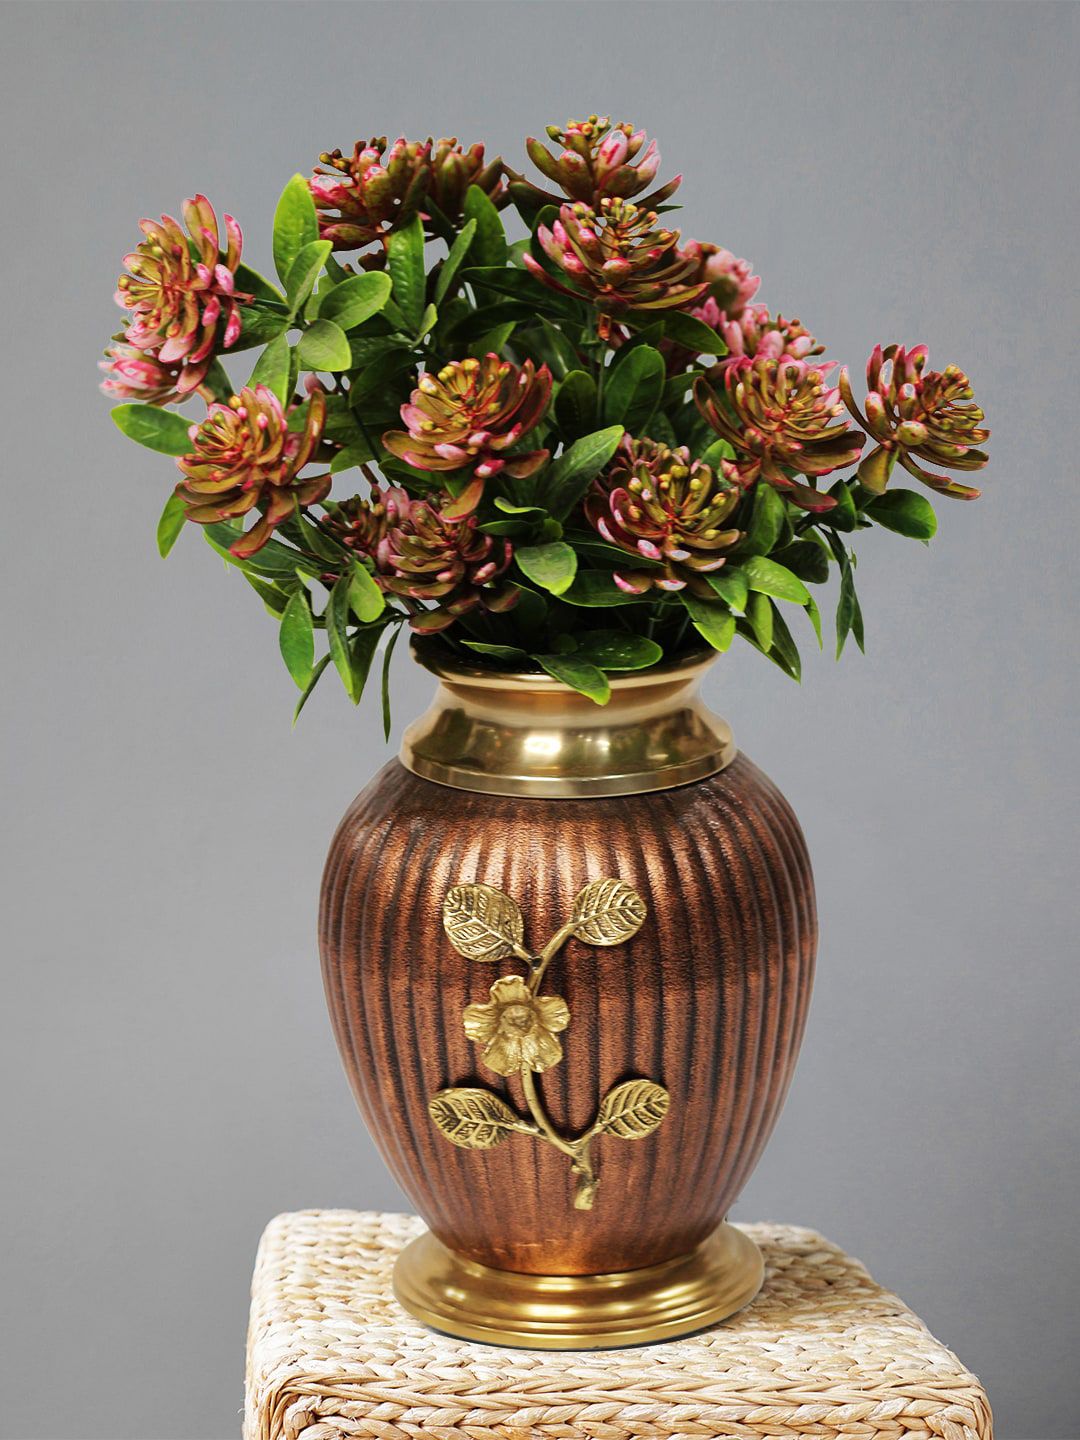 WENS Copper-Coloured Textured Vases Price in India